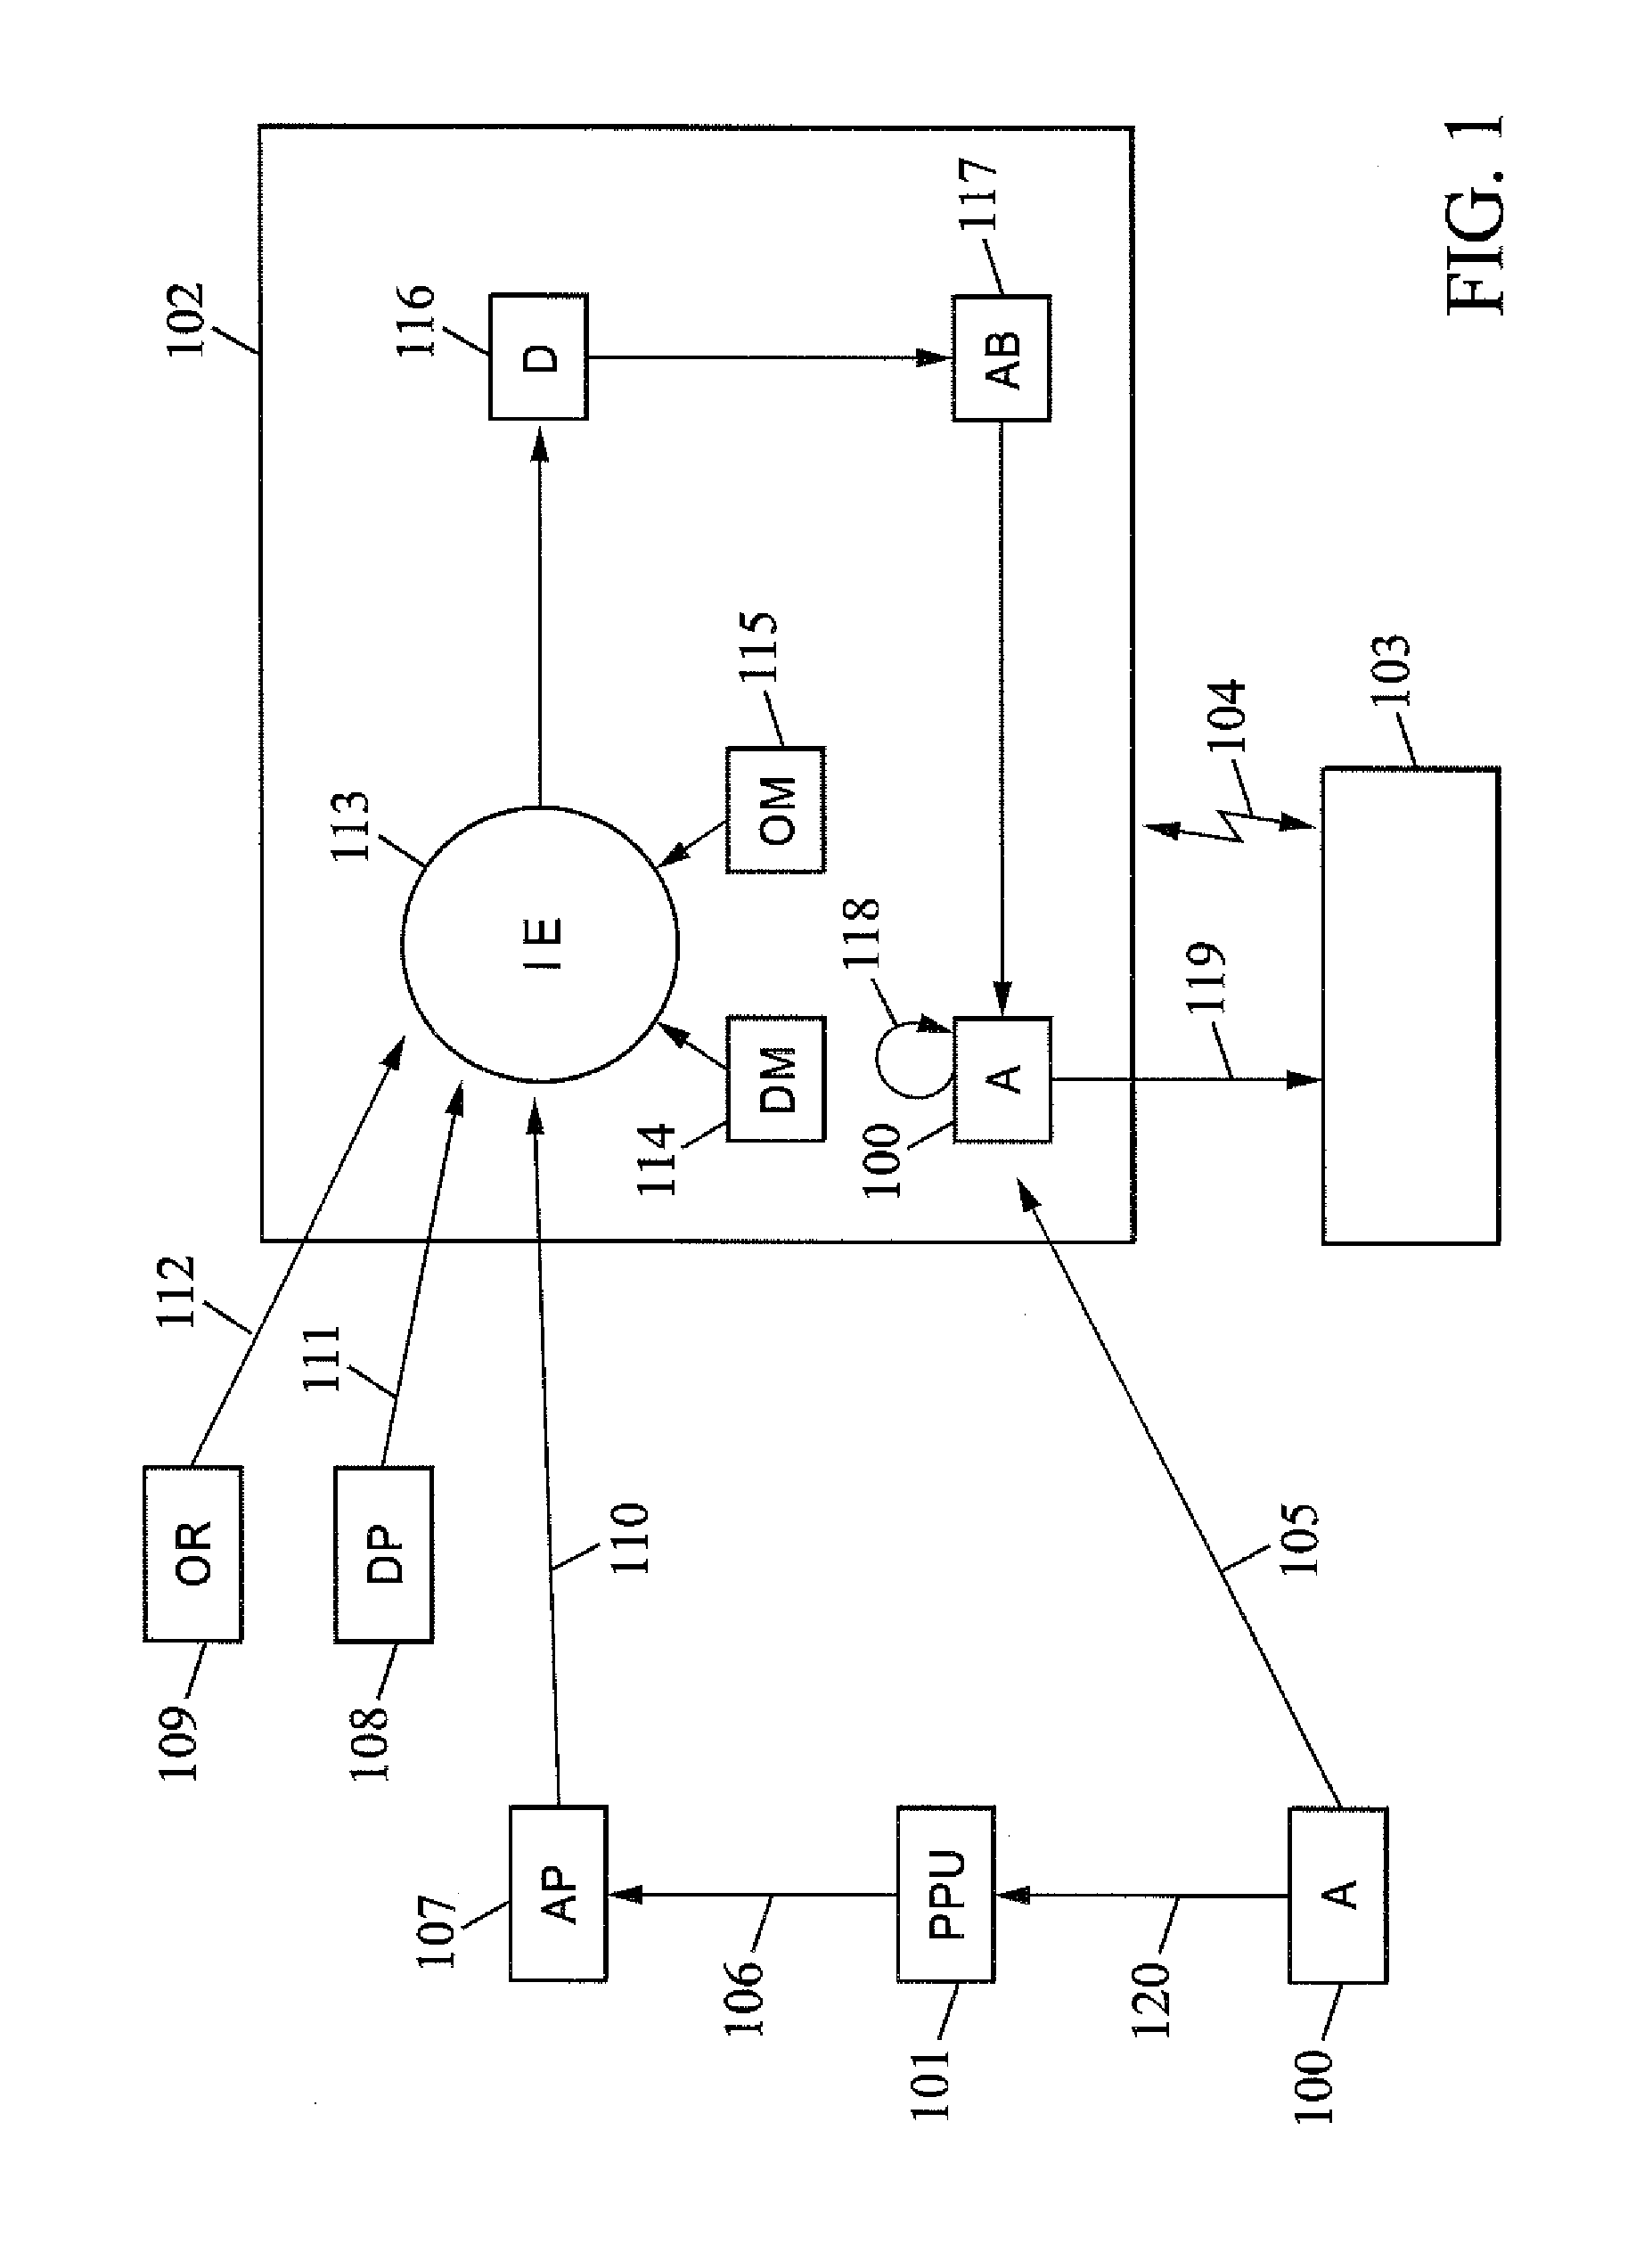 Method for allowing distributed running of an application and related device and inference engine